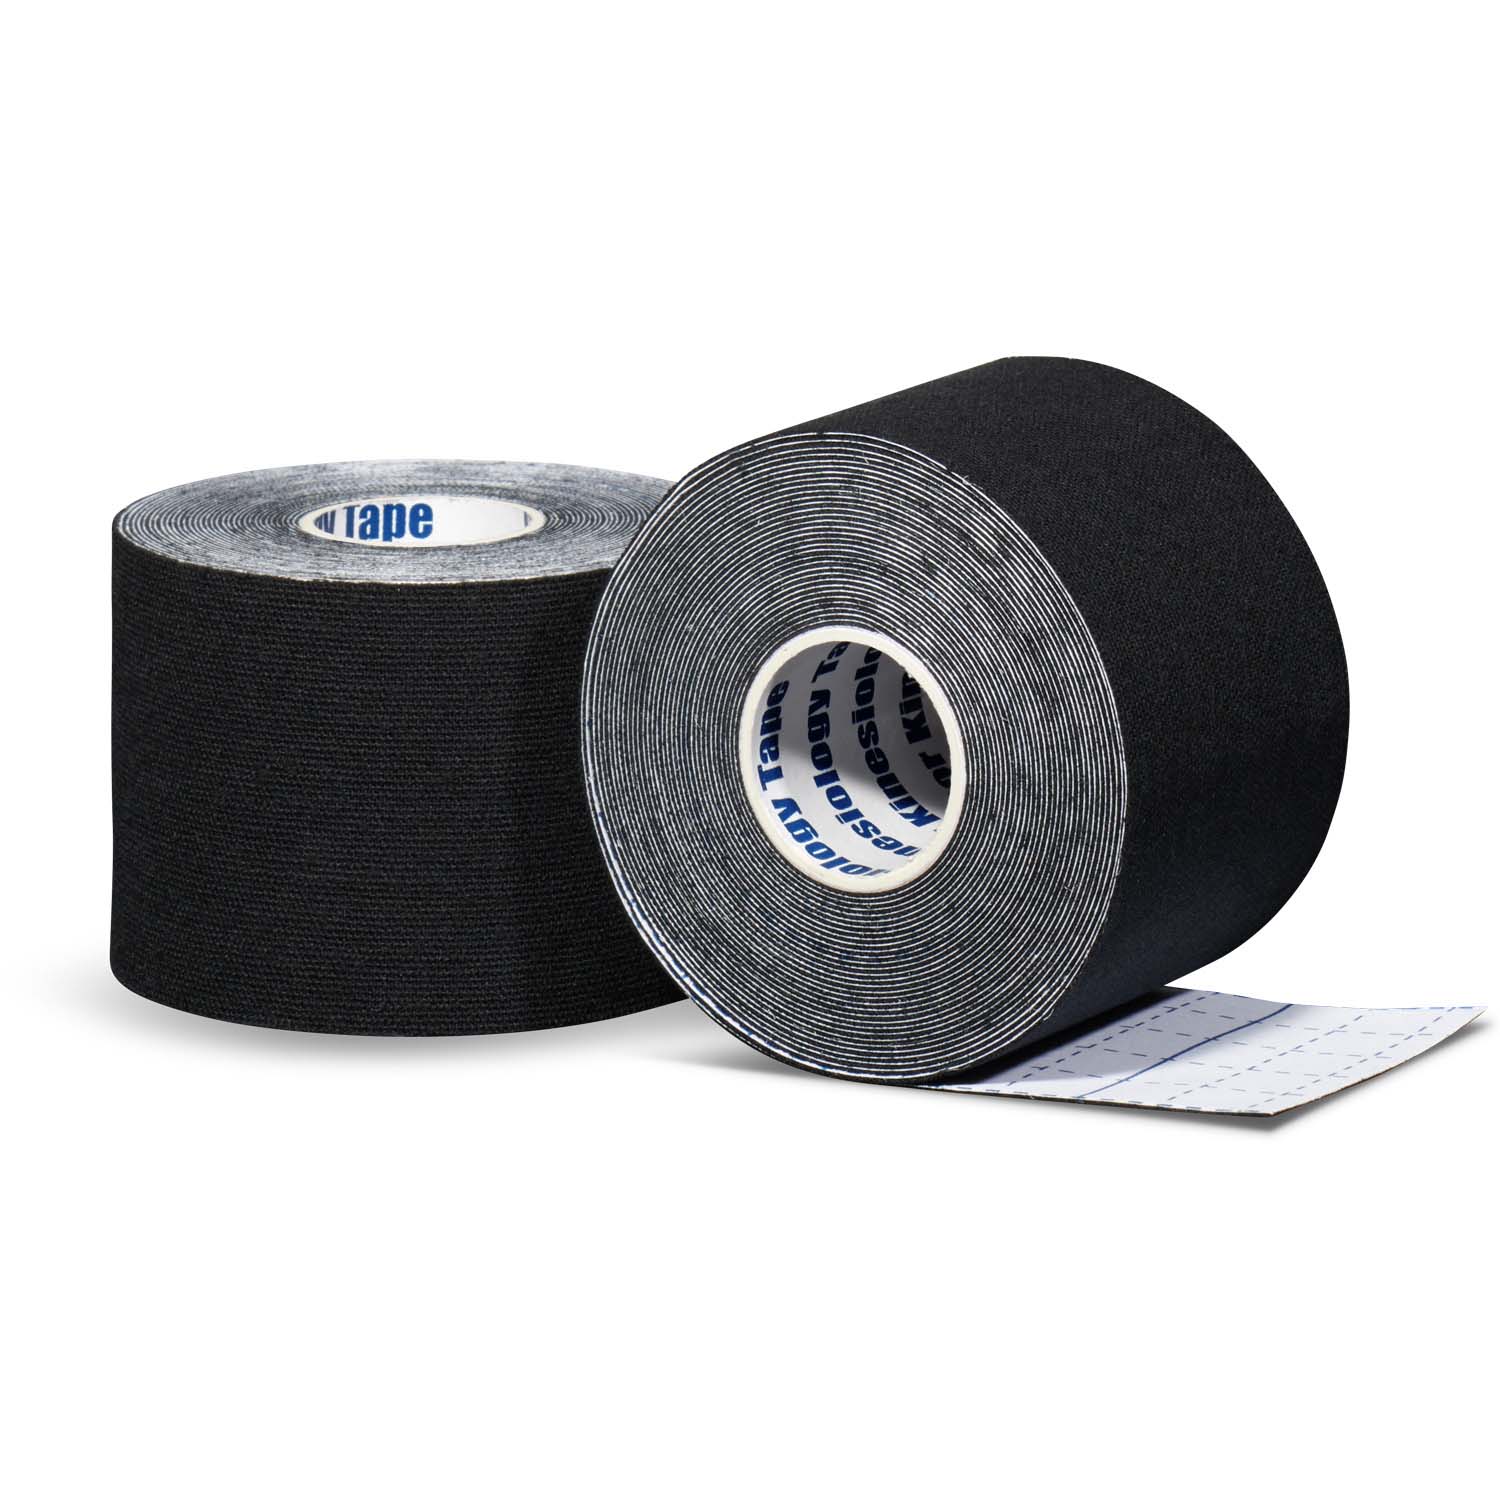 Kinesiology tape per roll black front and back view